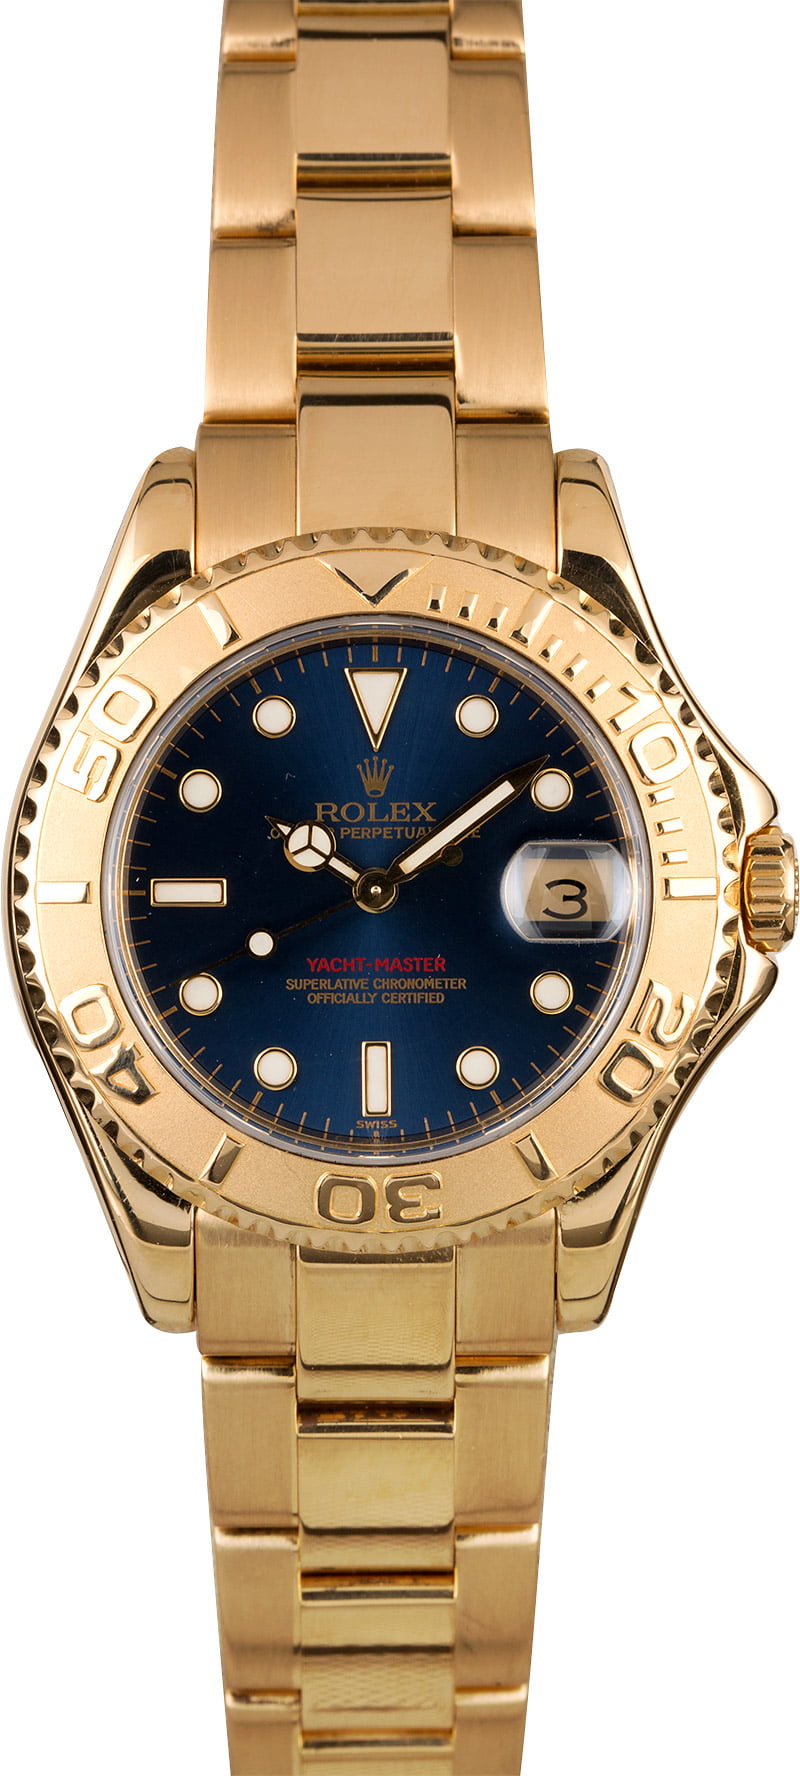 rolex yachtmaster price used